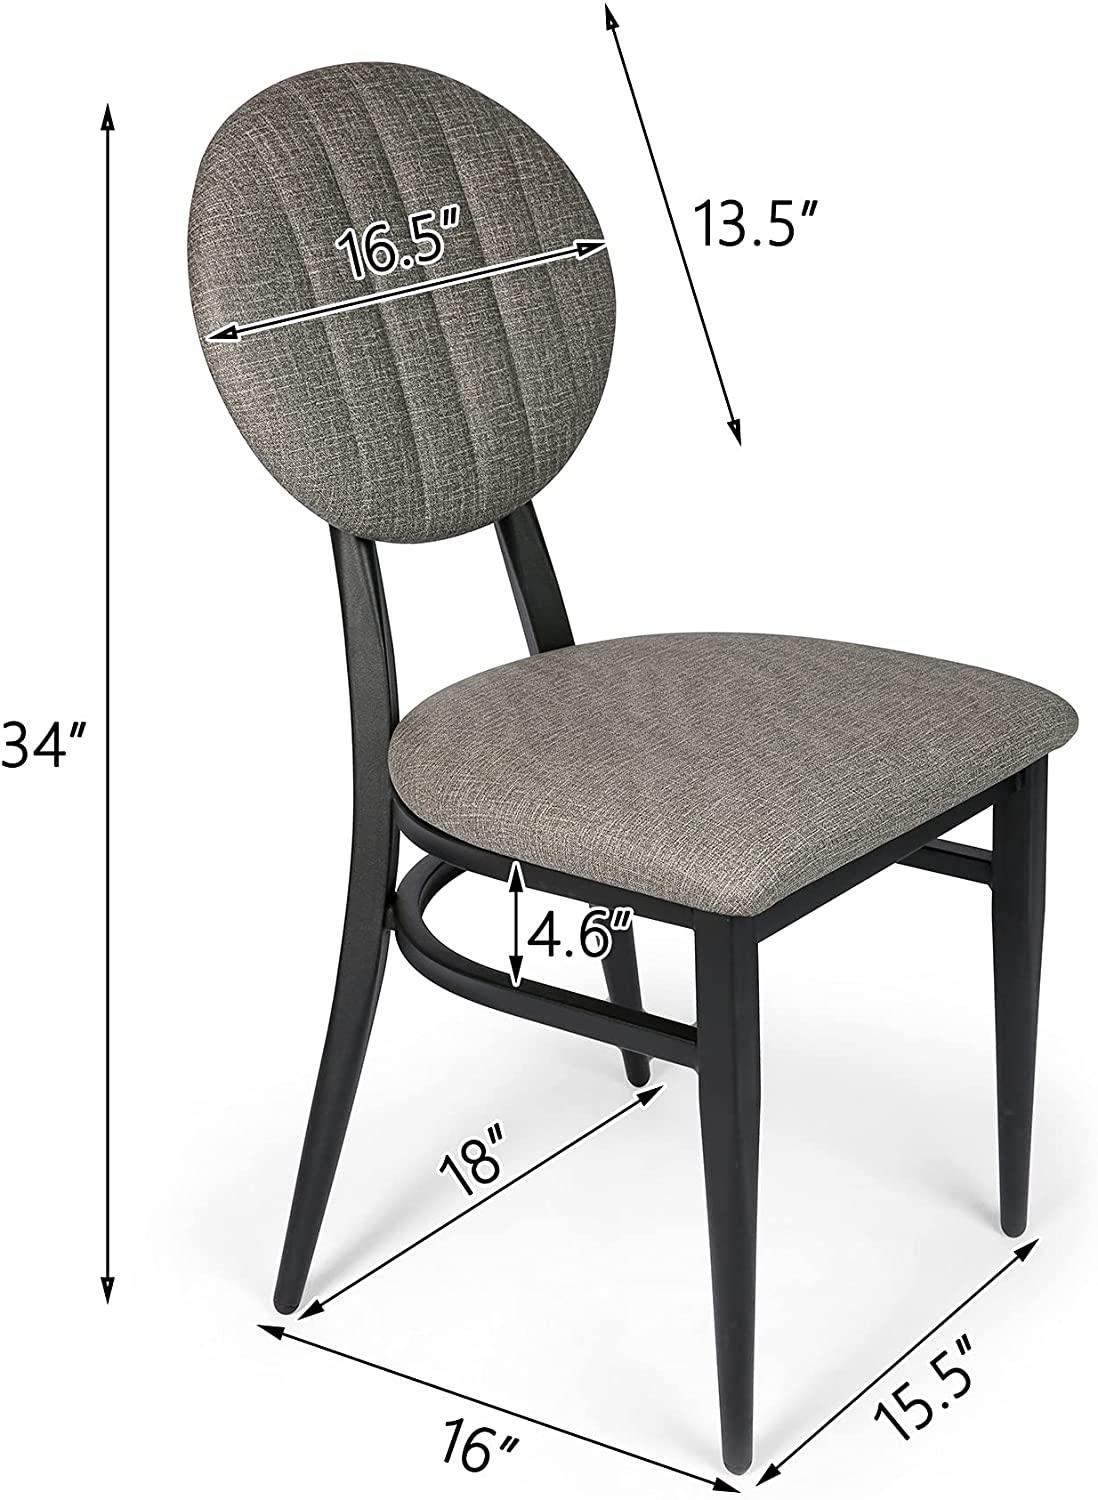 Set of 2 Mid-Century Modern Dining Room Chair with Round Striped Back Cushion Metal Frame Classy Kitchen Side Chair Simple Dining Chair, Grey - Bosonshop